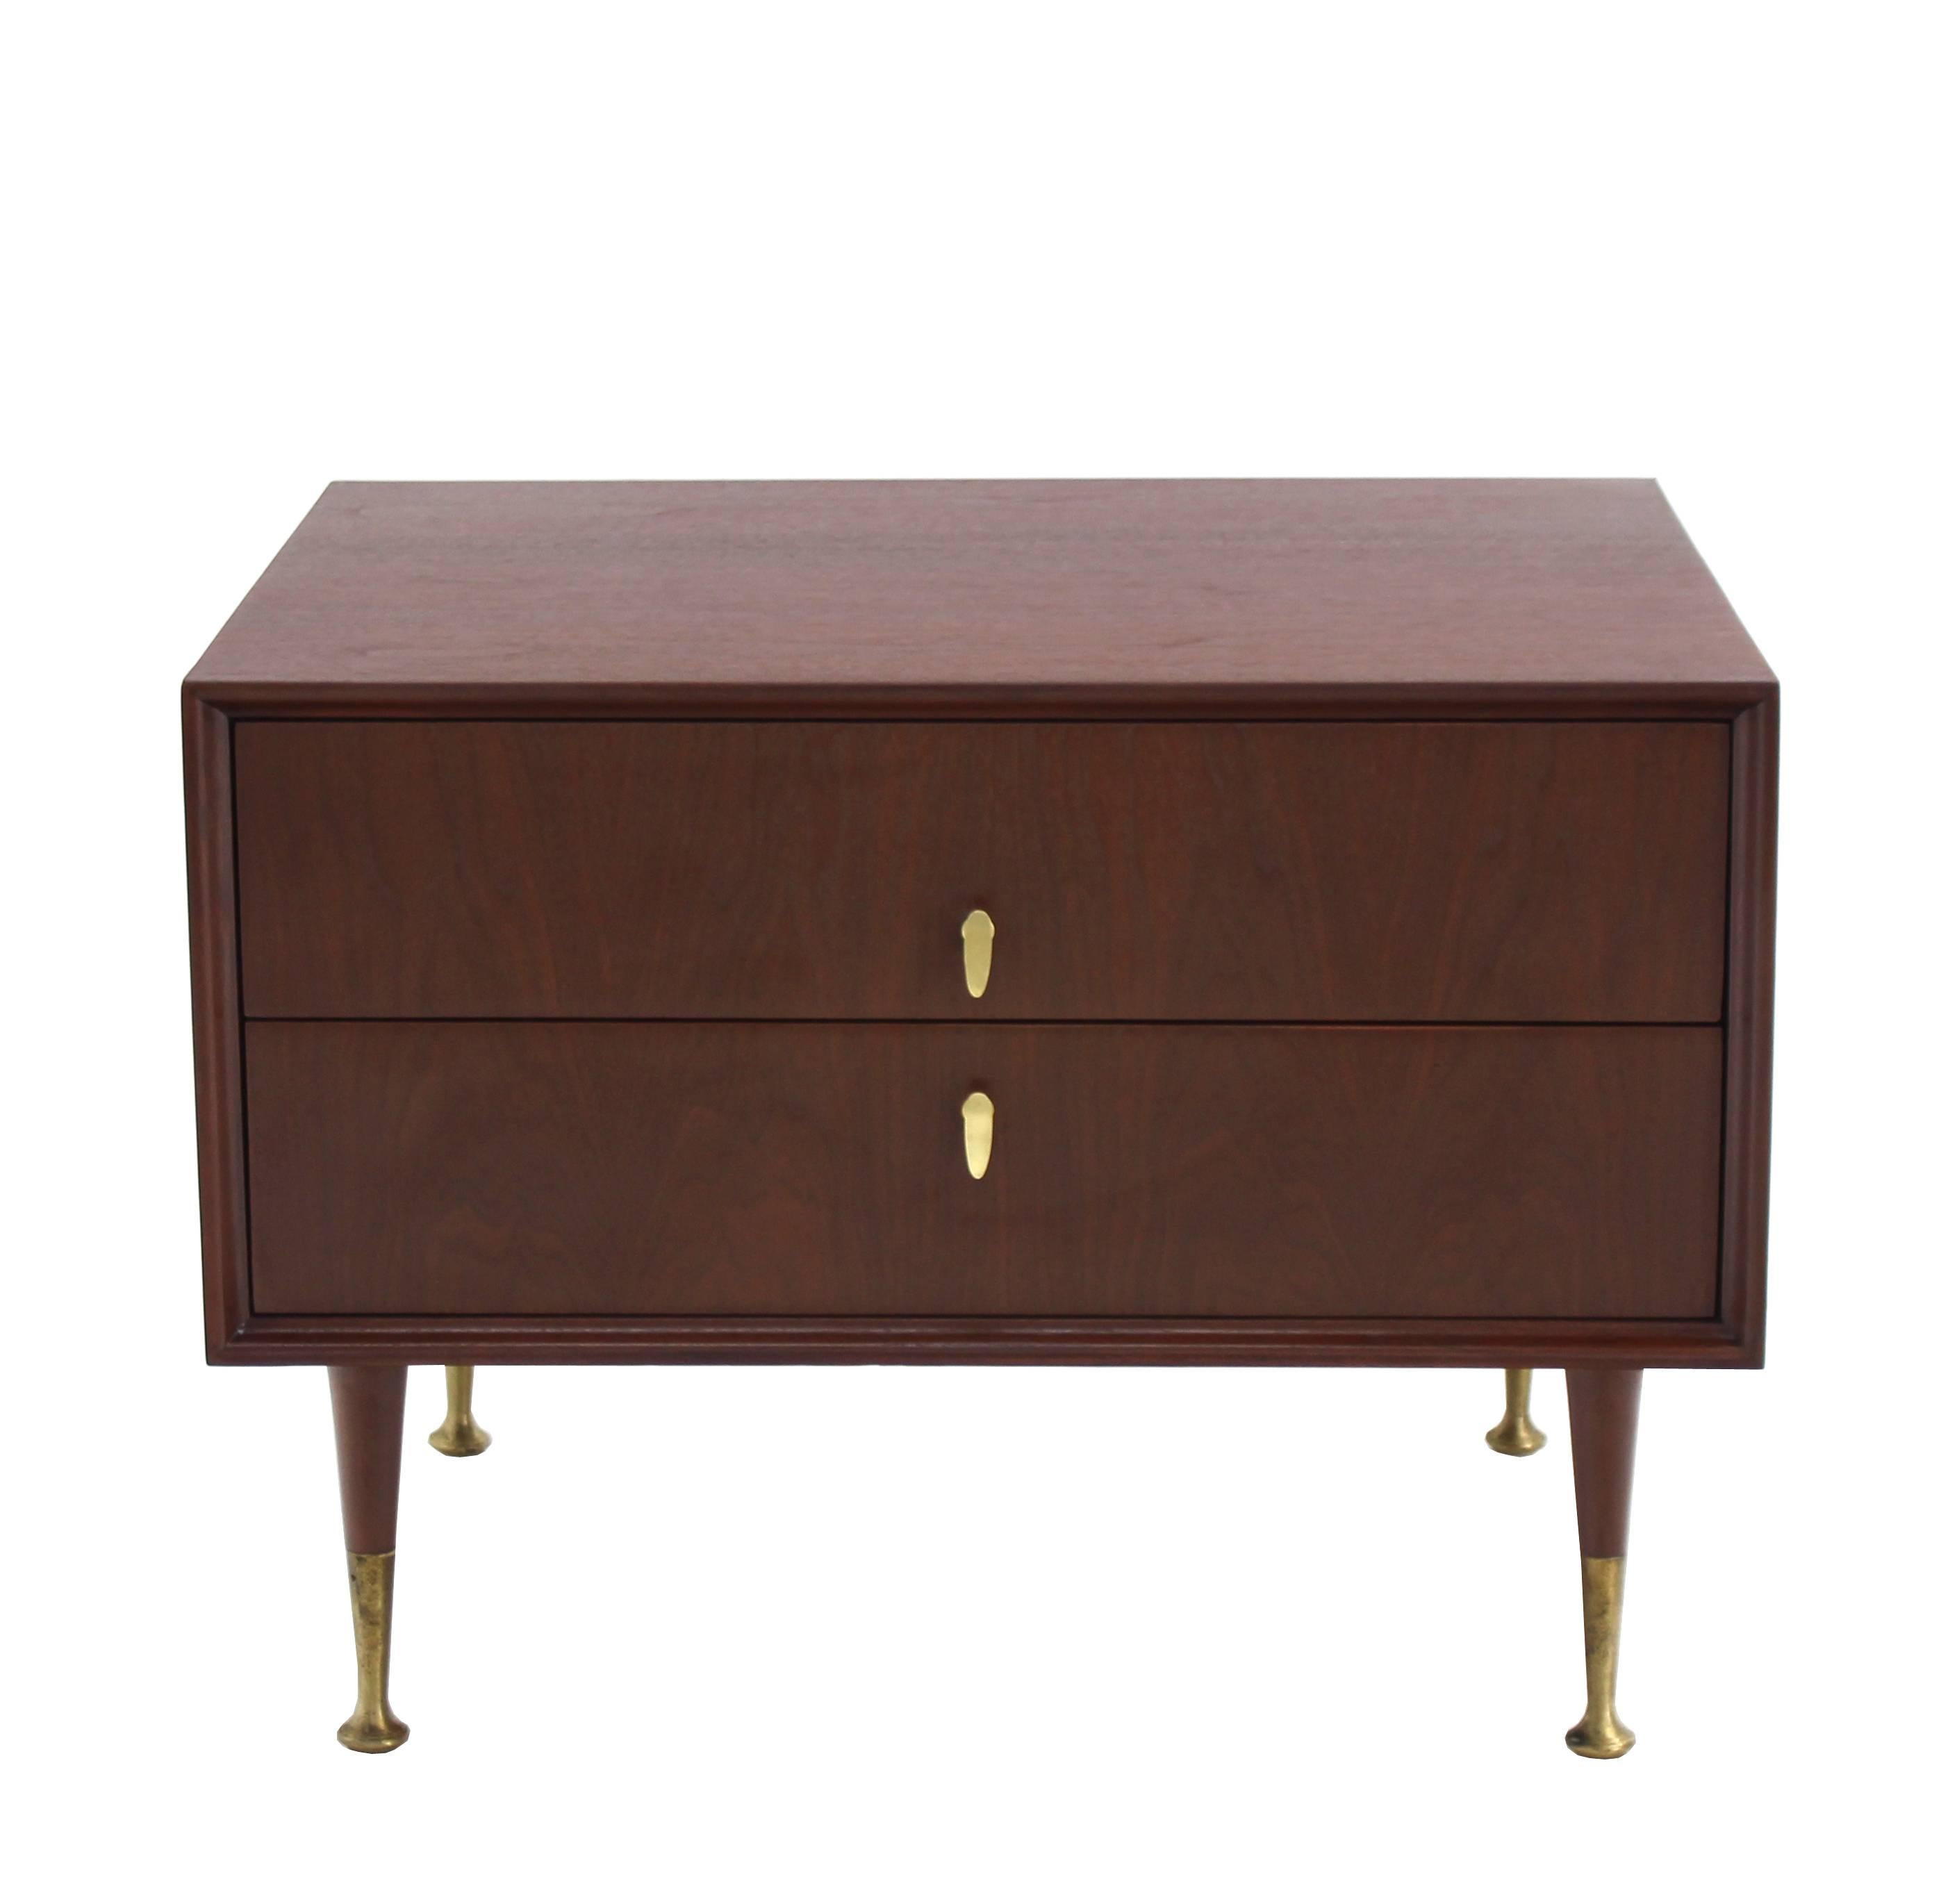 Mid-Century Modern Edmund Spence Large Square Two Drawer Cabinet End Table Nightstand Stand For Sale